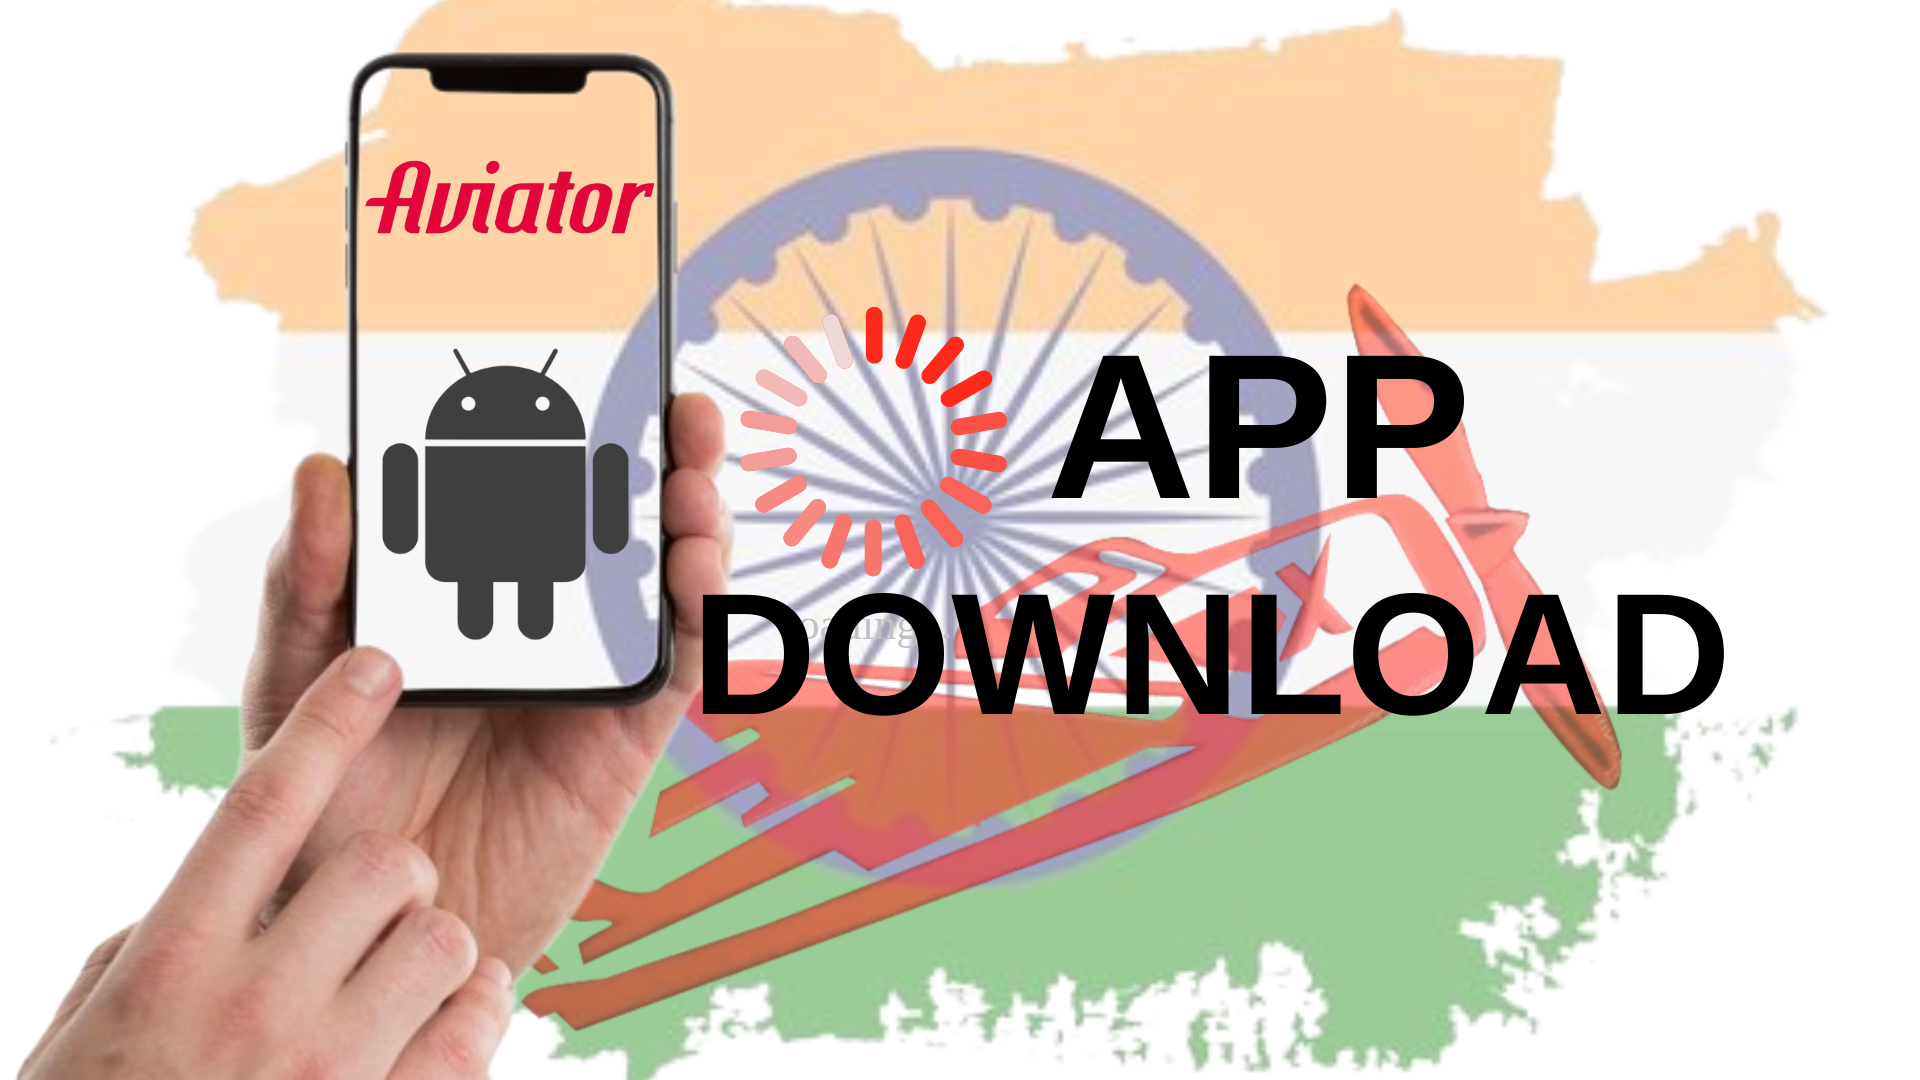 A hand holding an Android phone with text 'App download', and Indian flag background